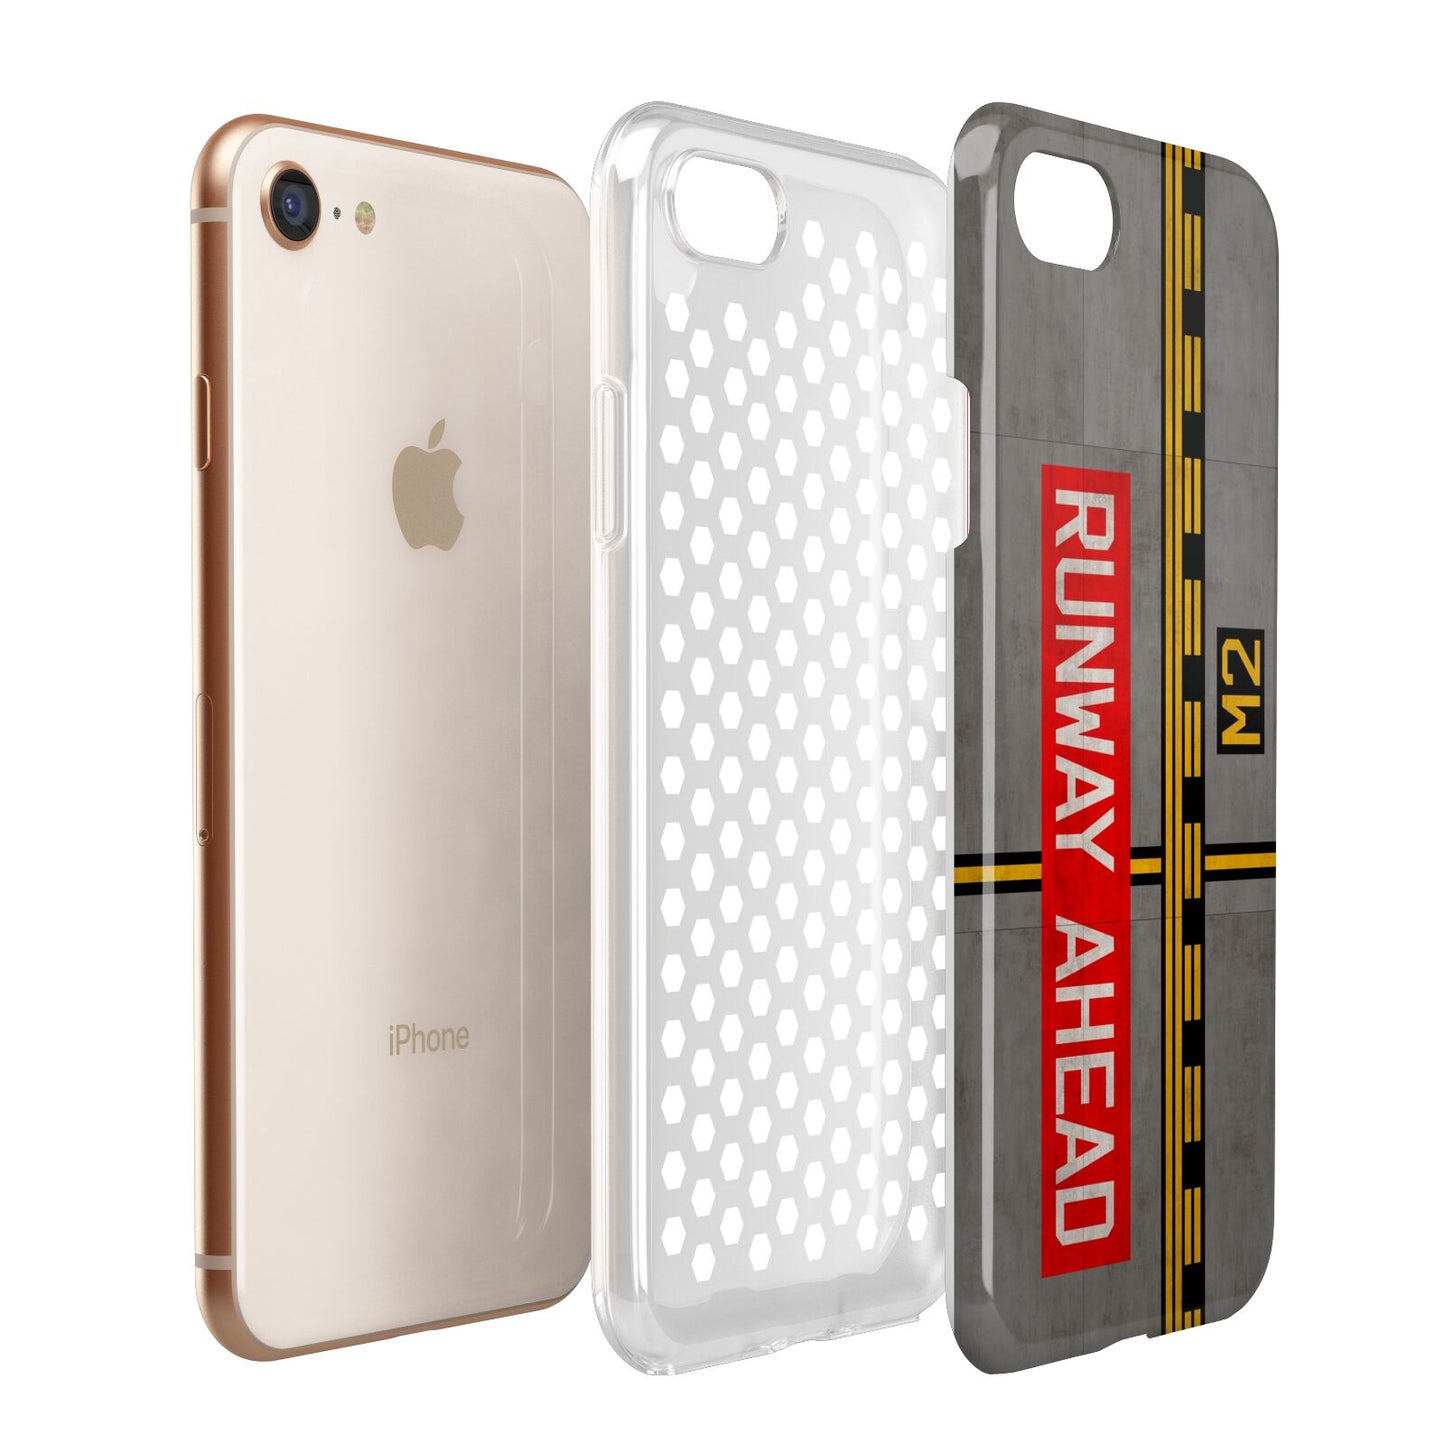 Runway Ahead Apple iPhone 7 8 3D Tough Case Expanded View